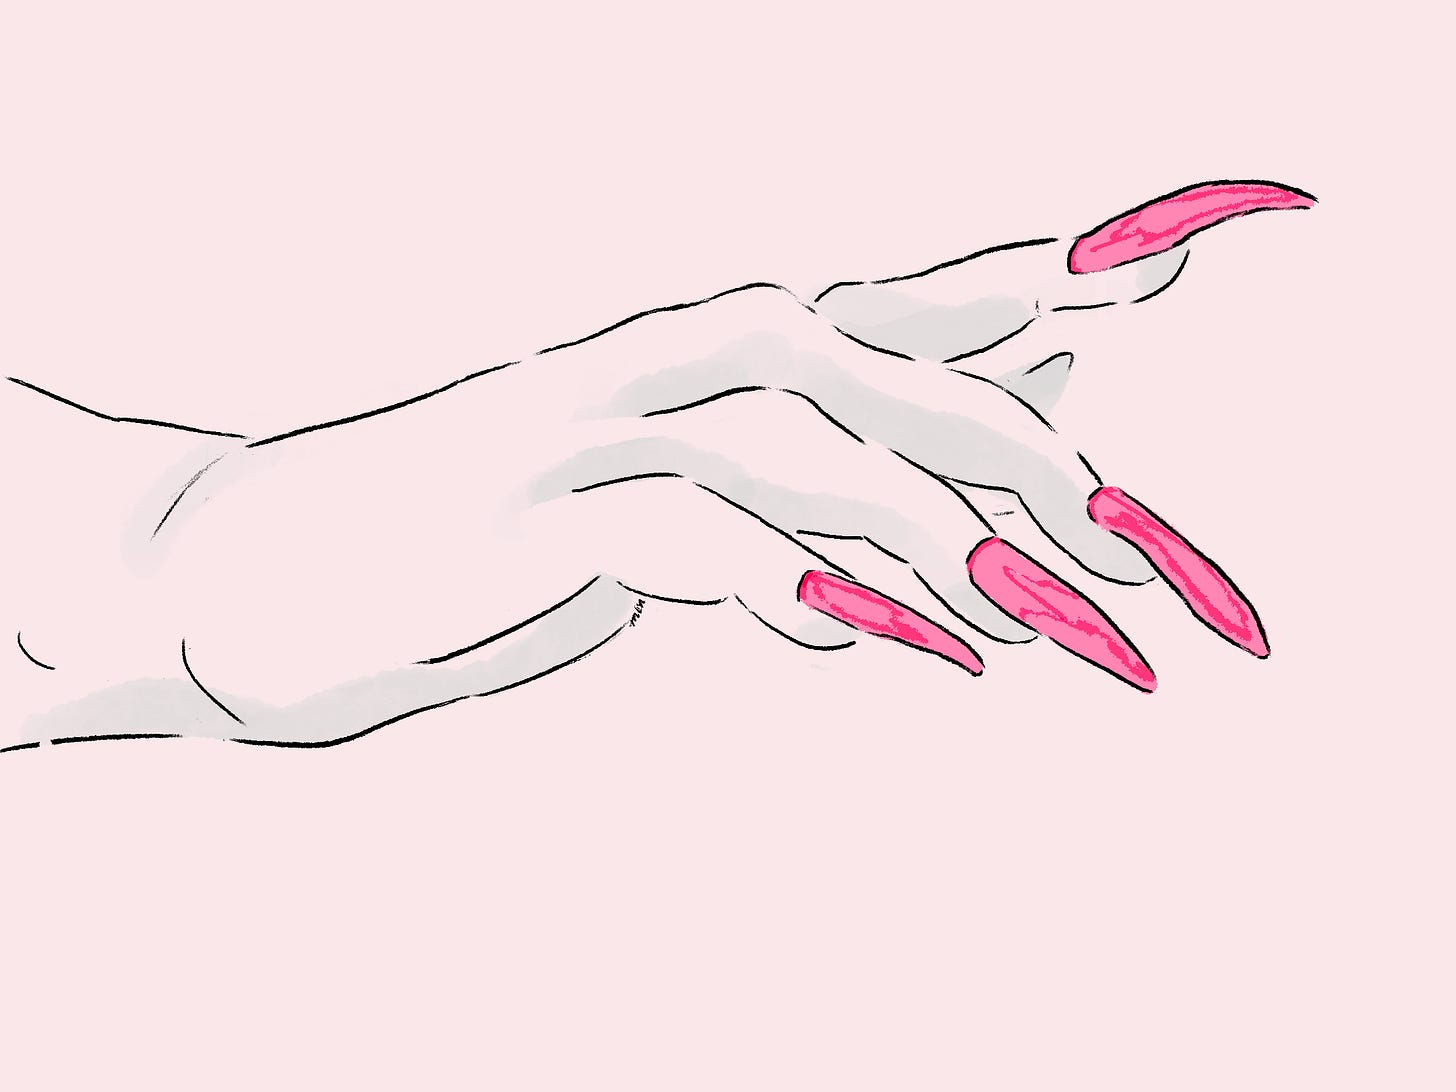 A woman's hand with long, pink fingernails reaches out.